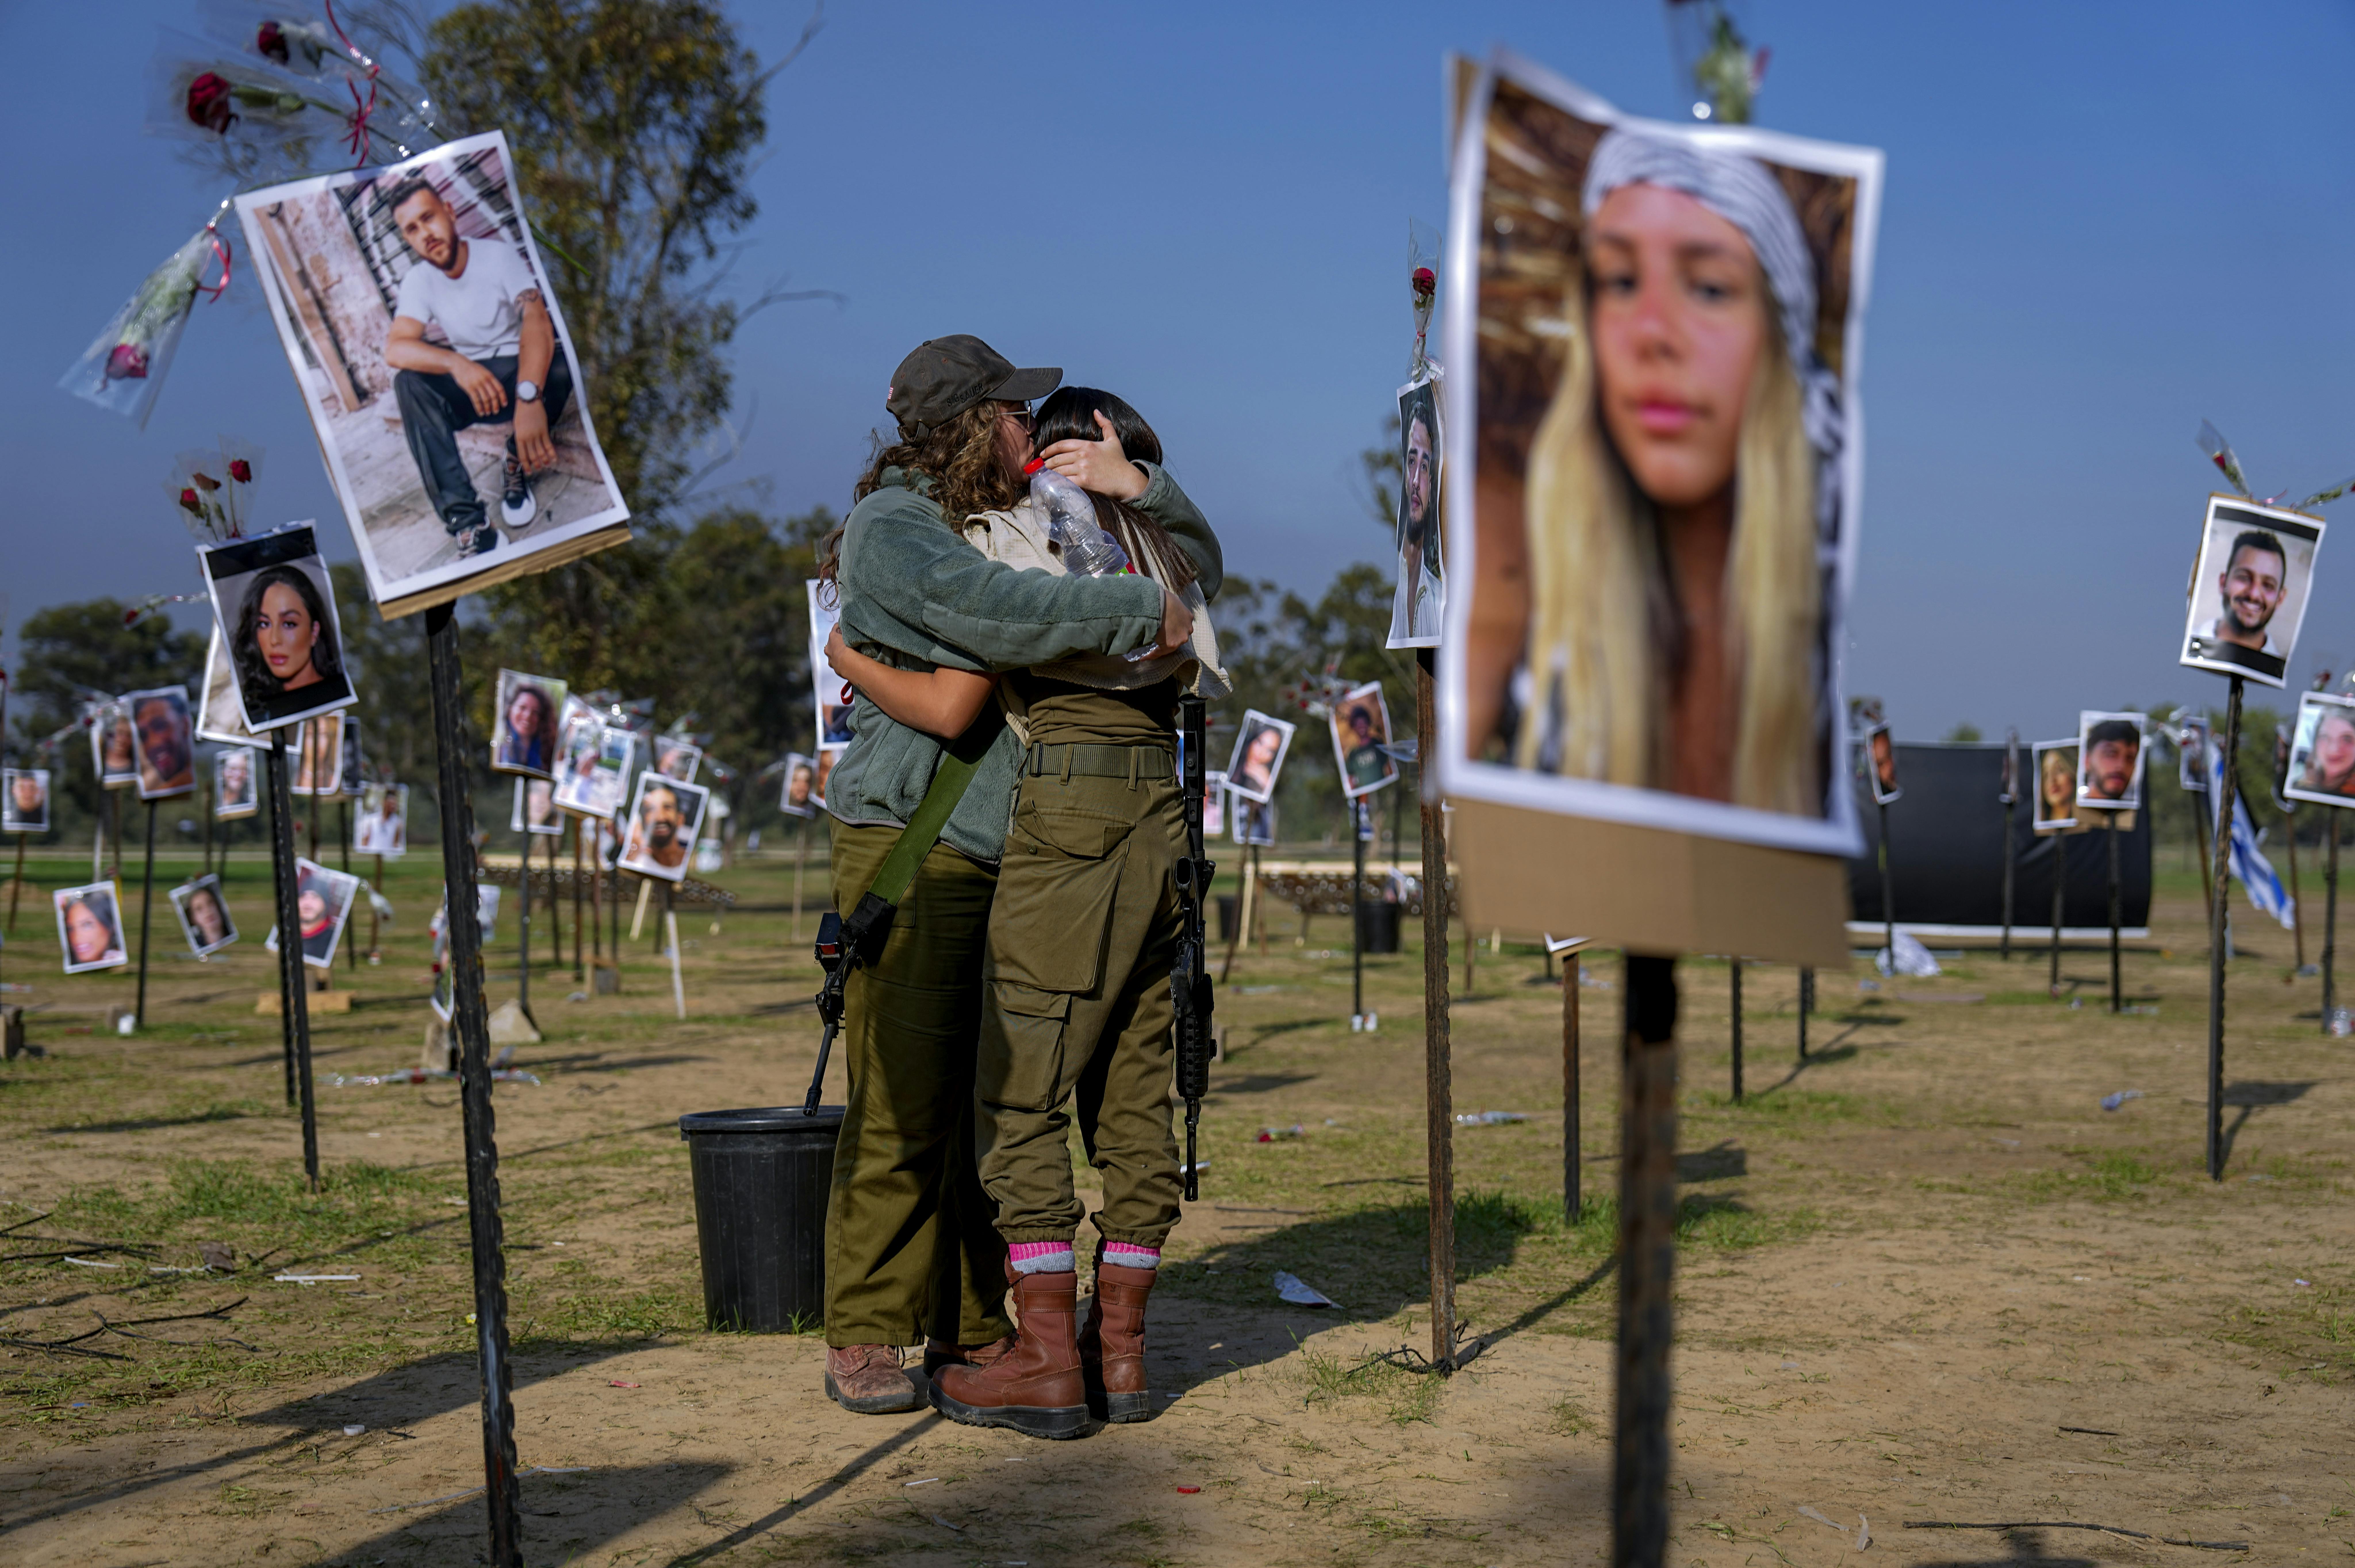 Israeli soldiers embrace next to photos of people killed and taken captive by Hamas militants during their violent rampage through the Nova music festival in southern Israel, which are displayed at the site of the event, to commemorate the October 7, massacre, near kibbutz Re'im, Friday, Dec. 1, 2023. (AP Photo/Ariel Schalit)